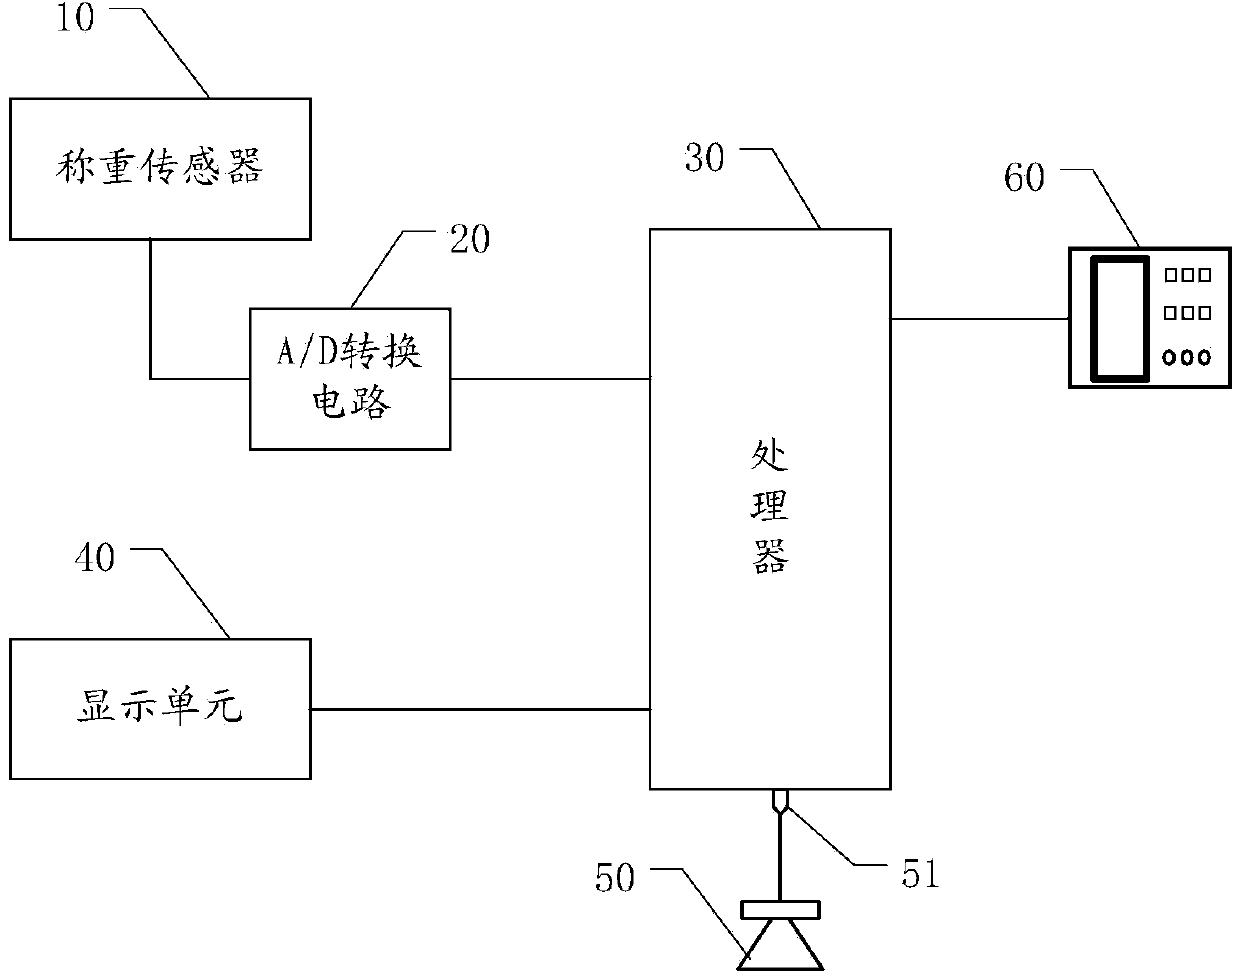 Device and system for automatically counting standard work-pieces of air conditioner